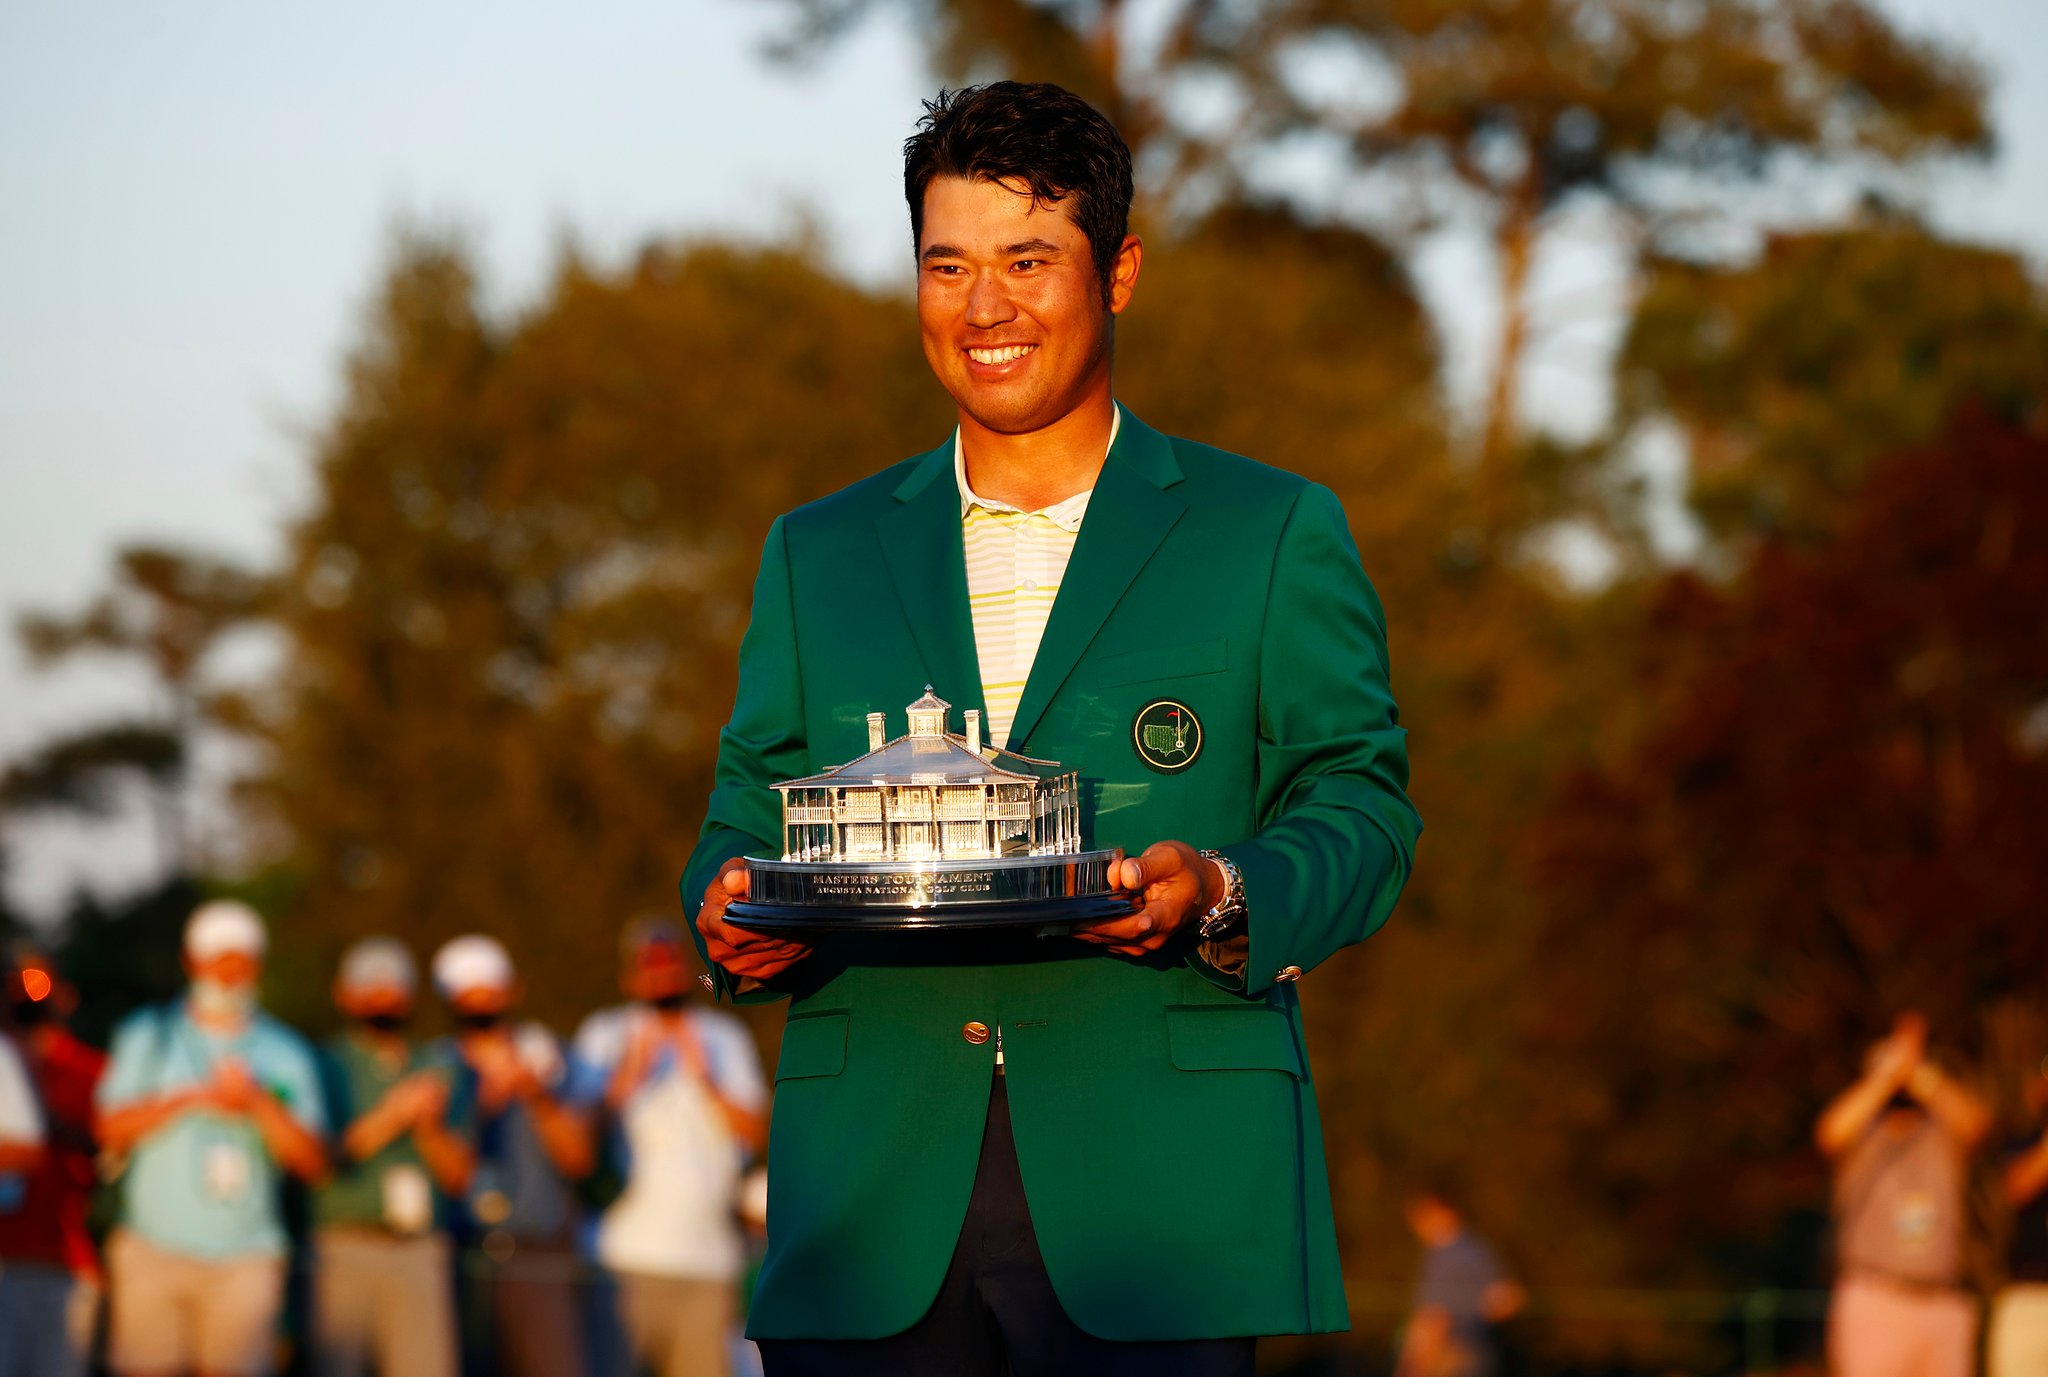 Masters Prize Money Portfolio 2022: What is the Masters Prize Money?  How much does a master's winner get?